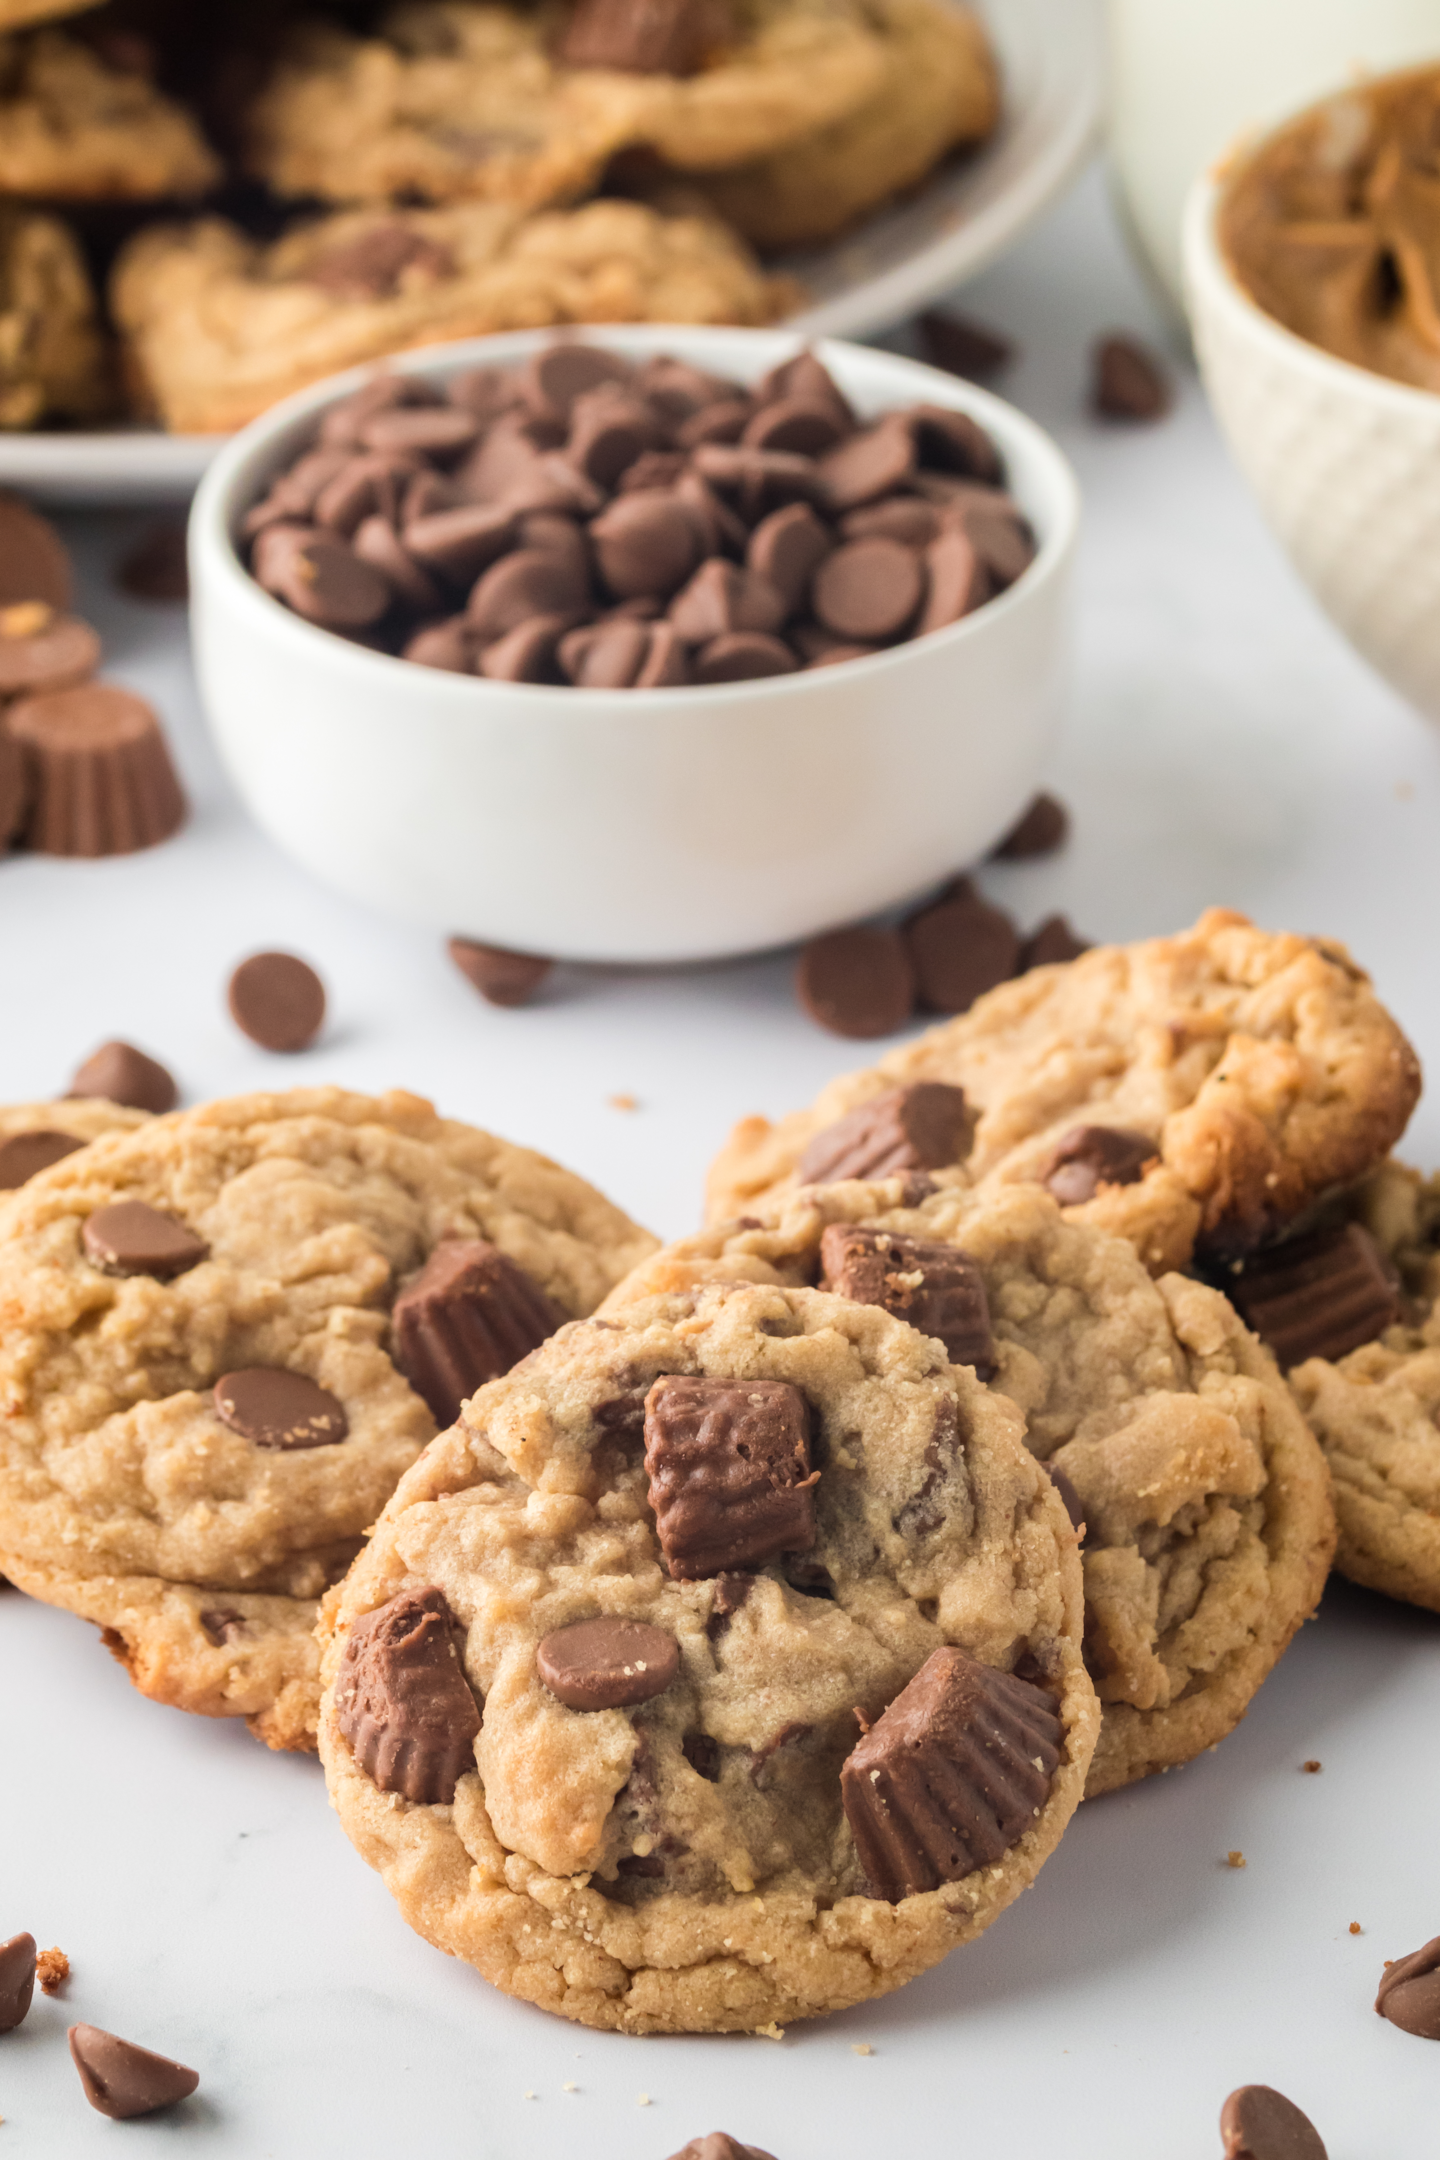 peanut butter cup cookies on a plate with a dish of chocolate chips